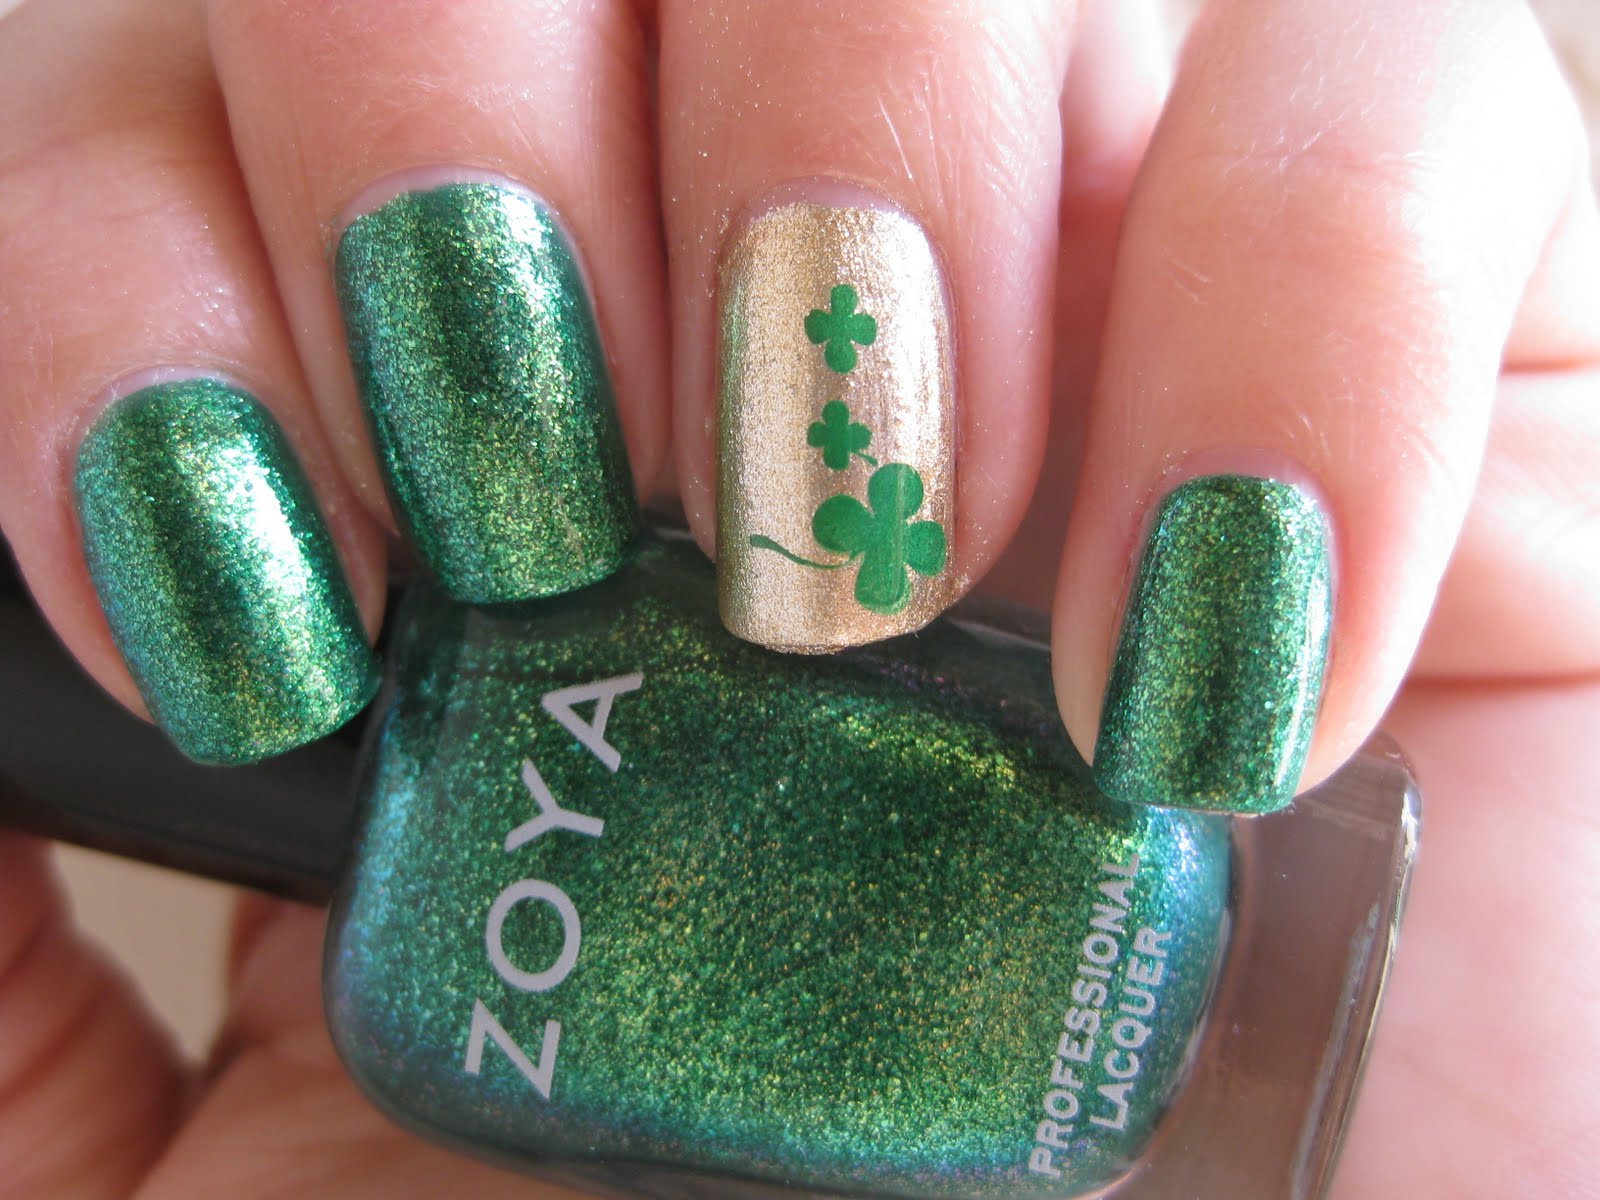 2. "Green and Gold Gel Nail Design for St. Patrick's Day" - wide 6